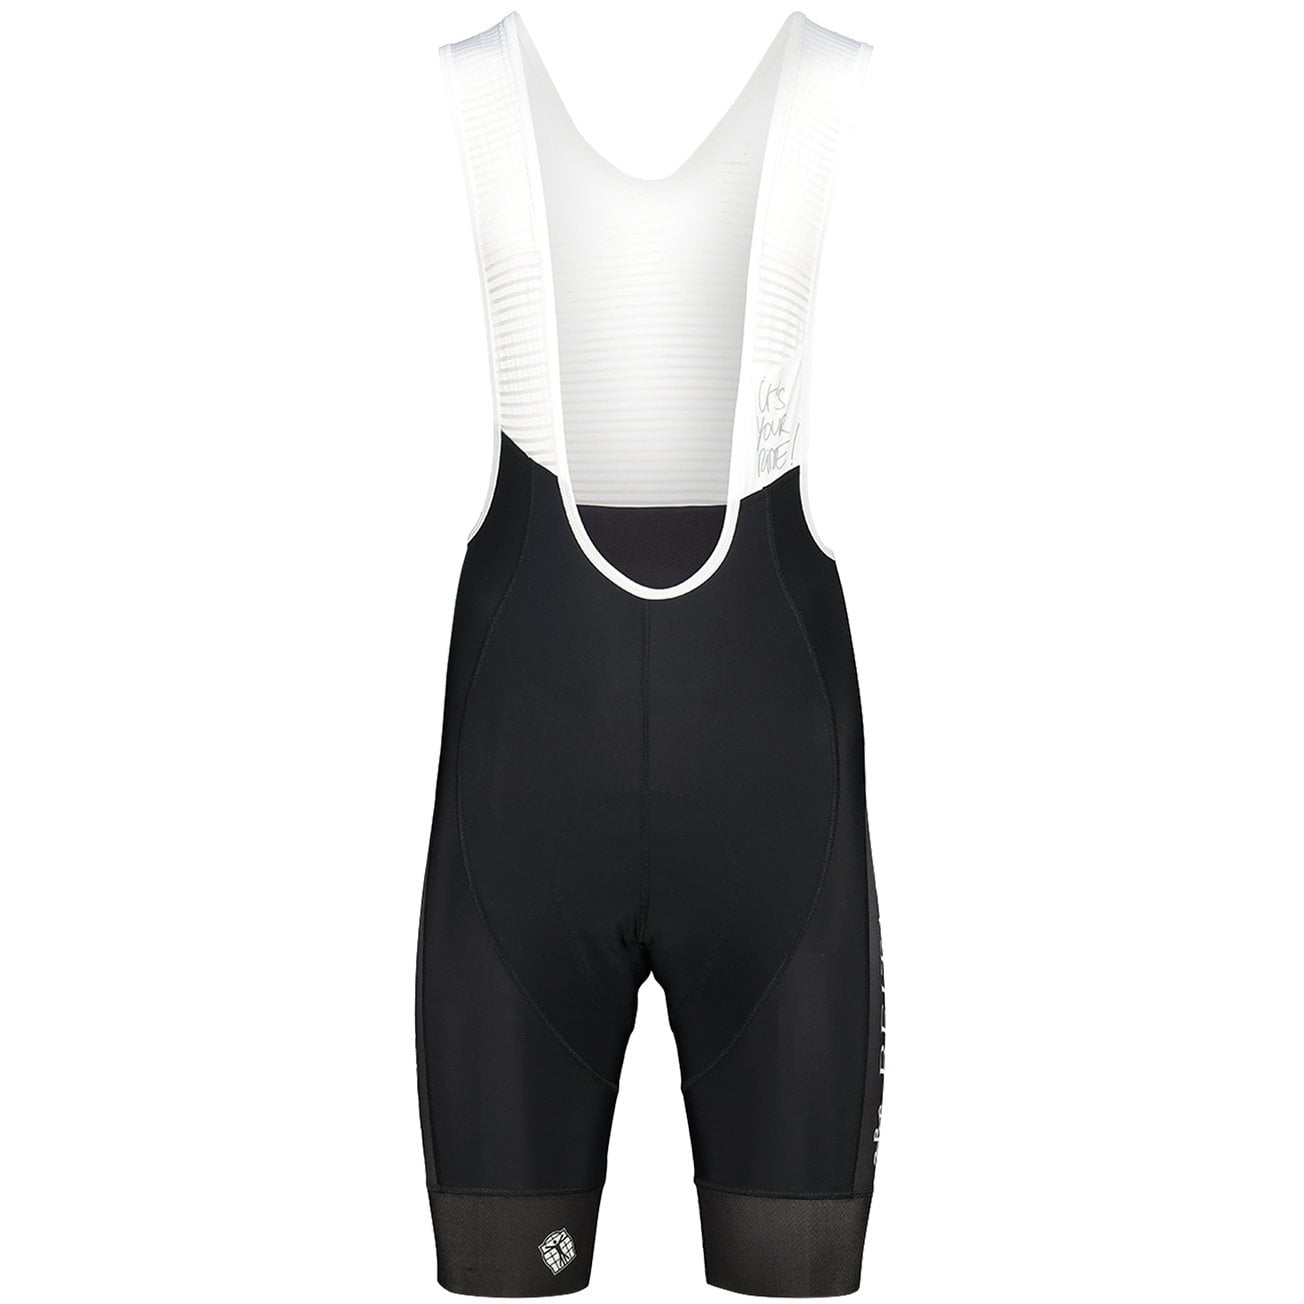 Uno-X Icon TdF 2023 Bib Shorts, for men, size 2XL, Cycle trousers, Cycle gear